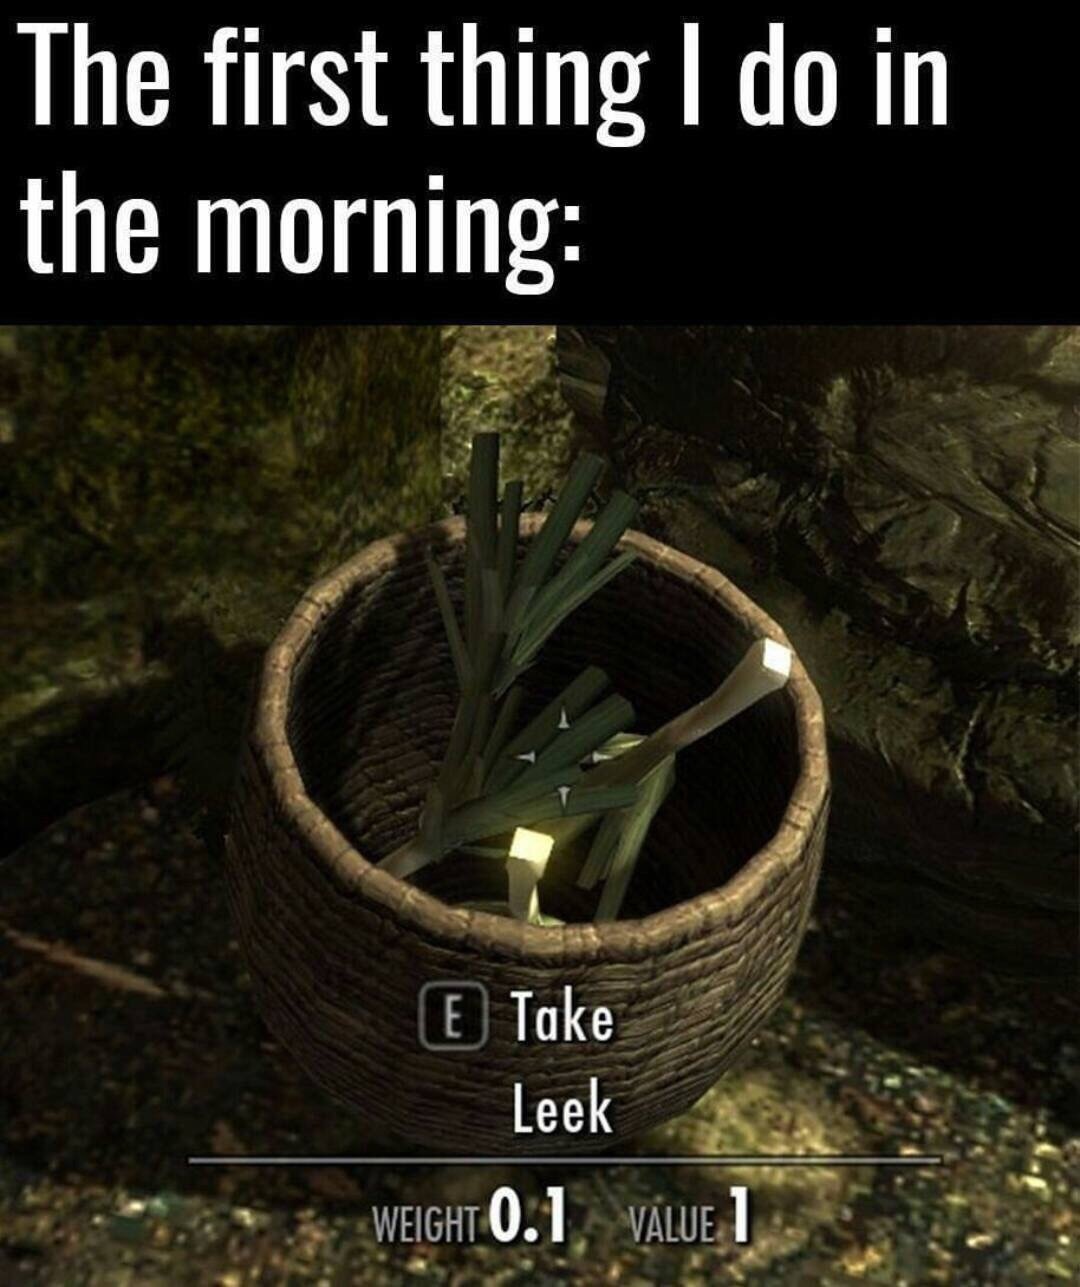 tree - The first thing I do in the morning E Take Leek Weight 0.1 Value 1